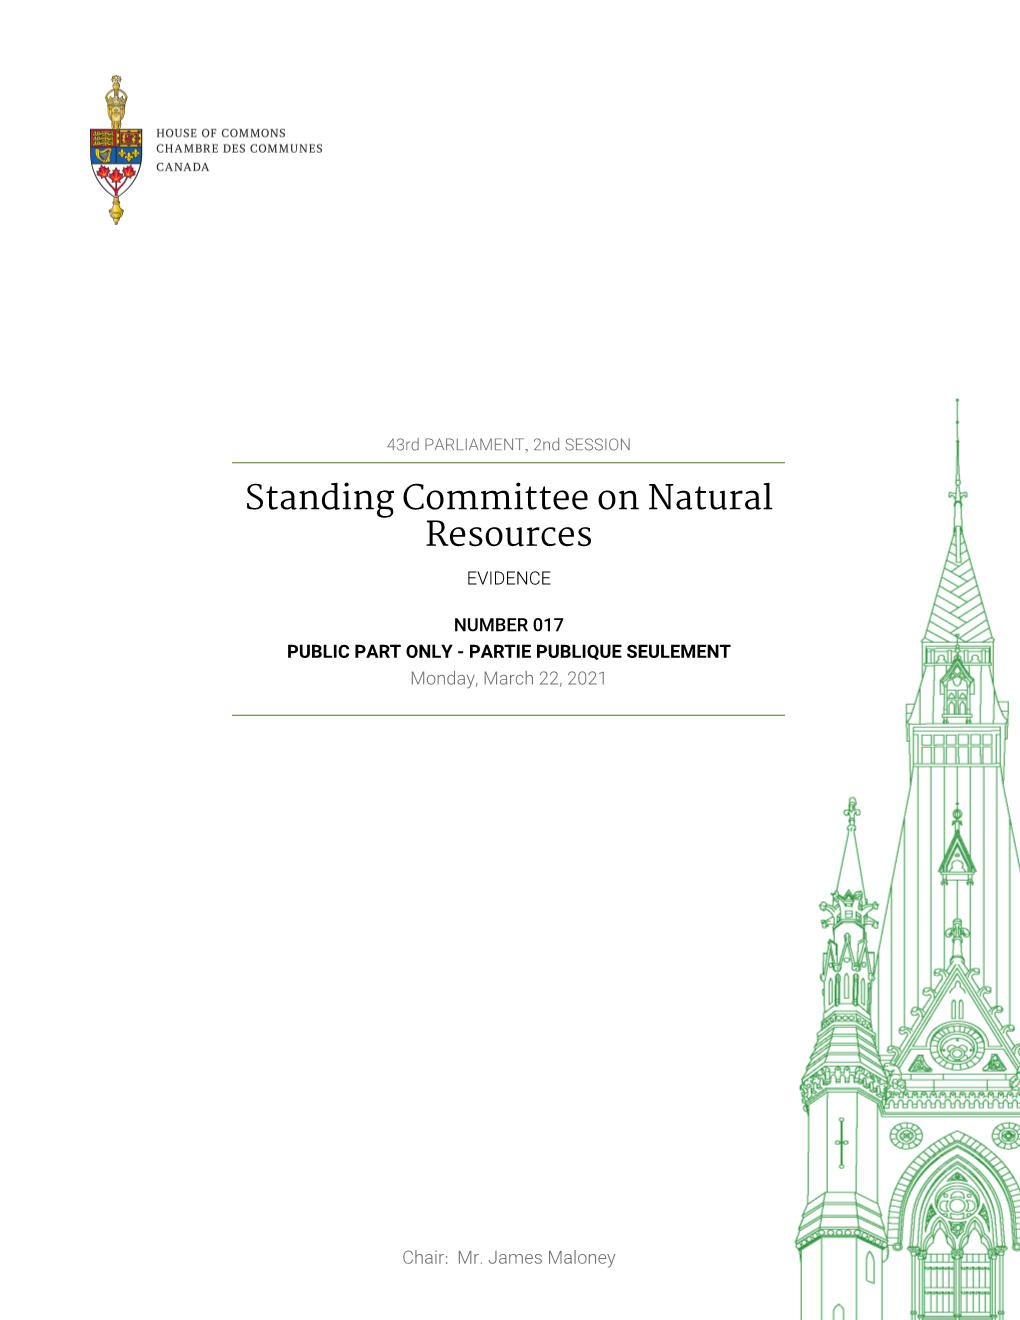 Evidence of the Standing Committee on Natural